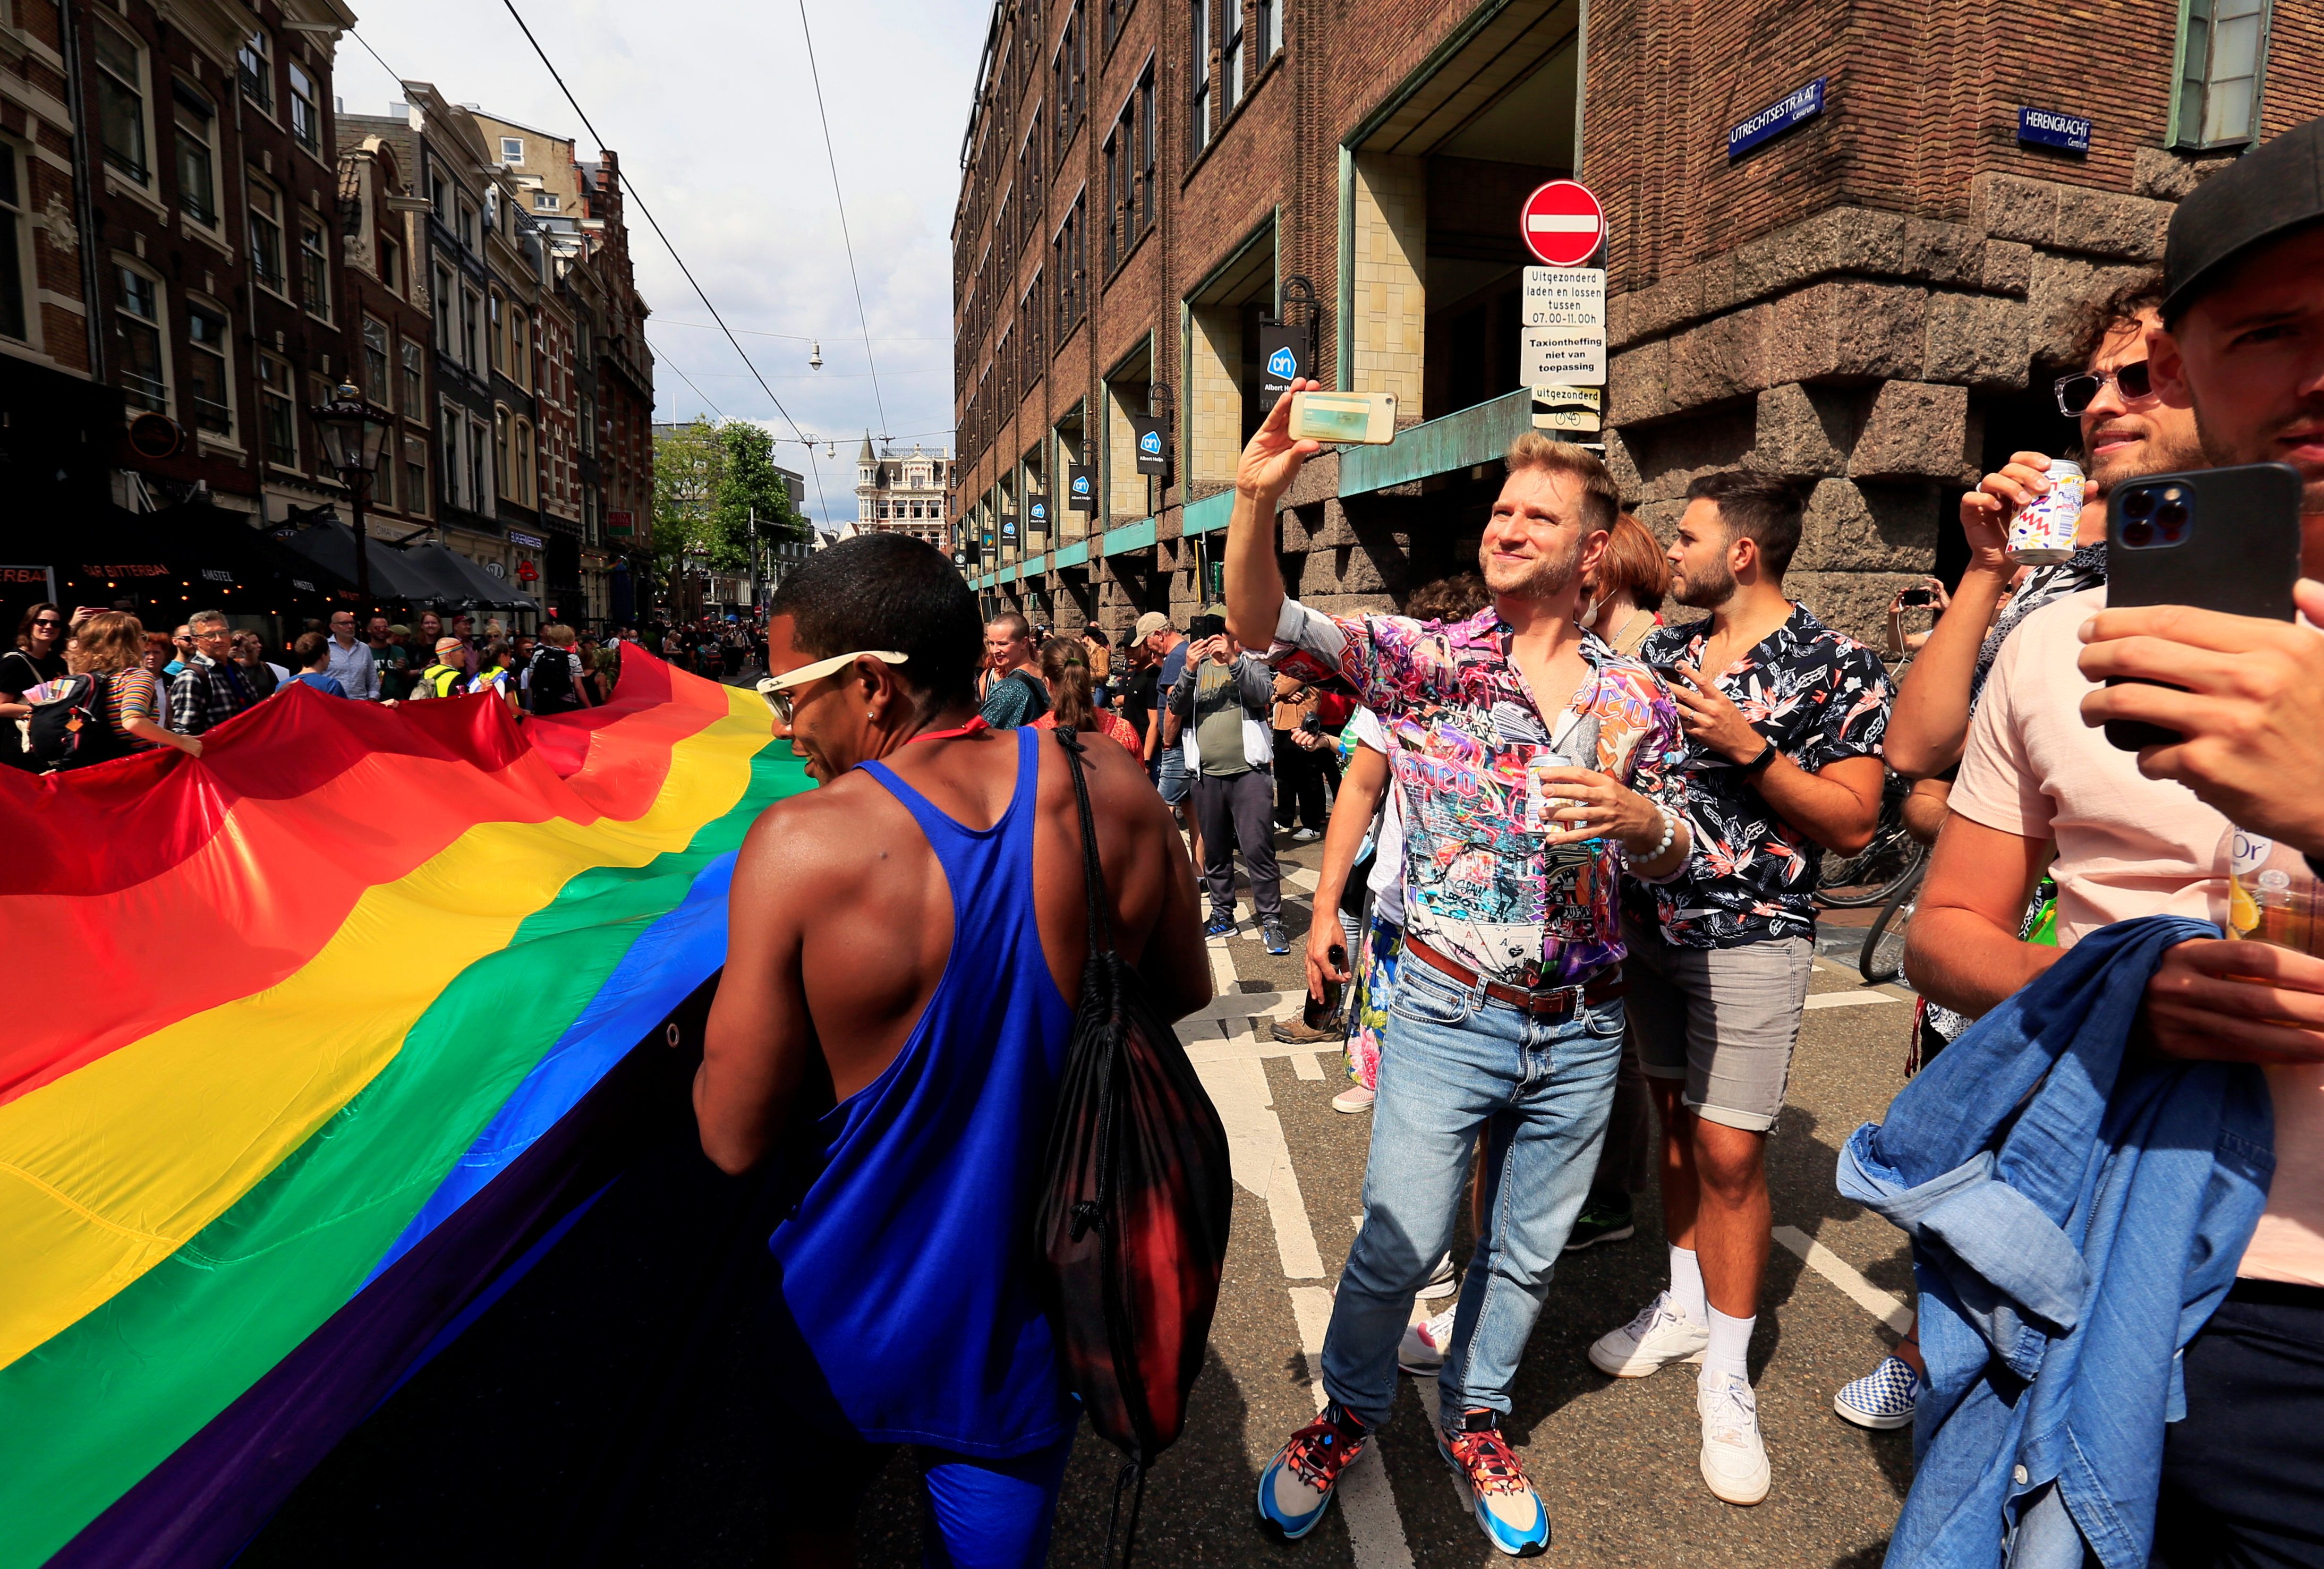 Amsterdam substitutes ‘Pride Walk’ for canal parade in 25th anniversary of Gay Pride